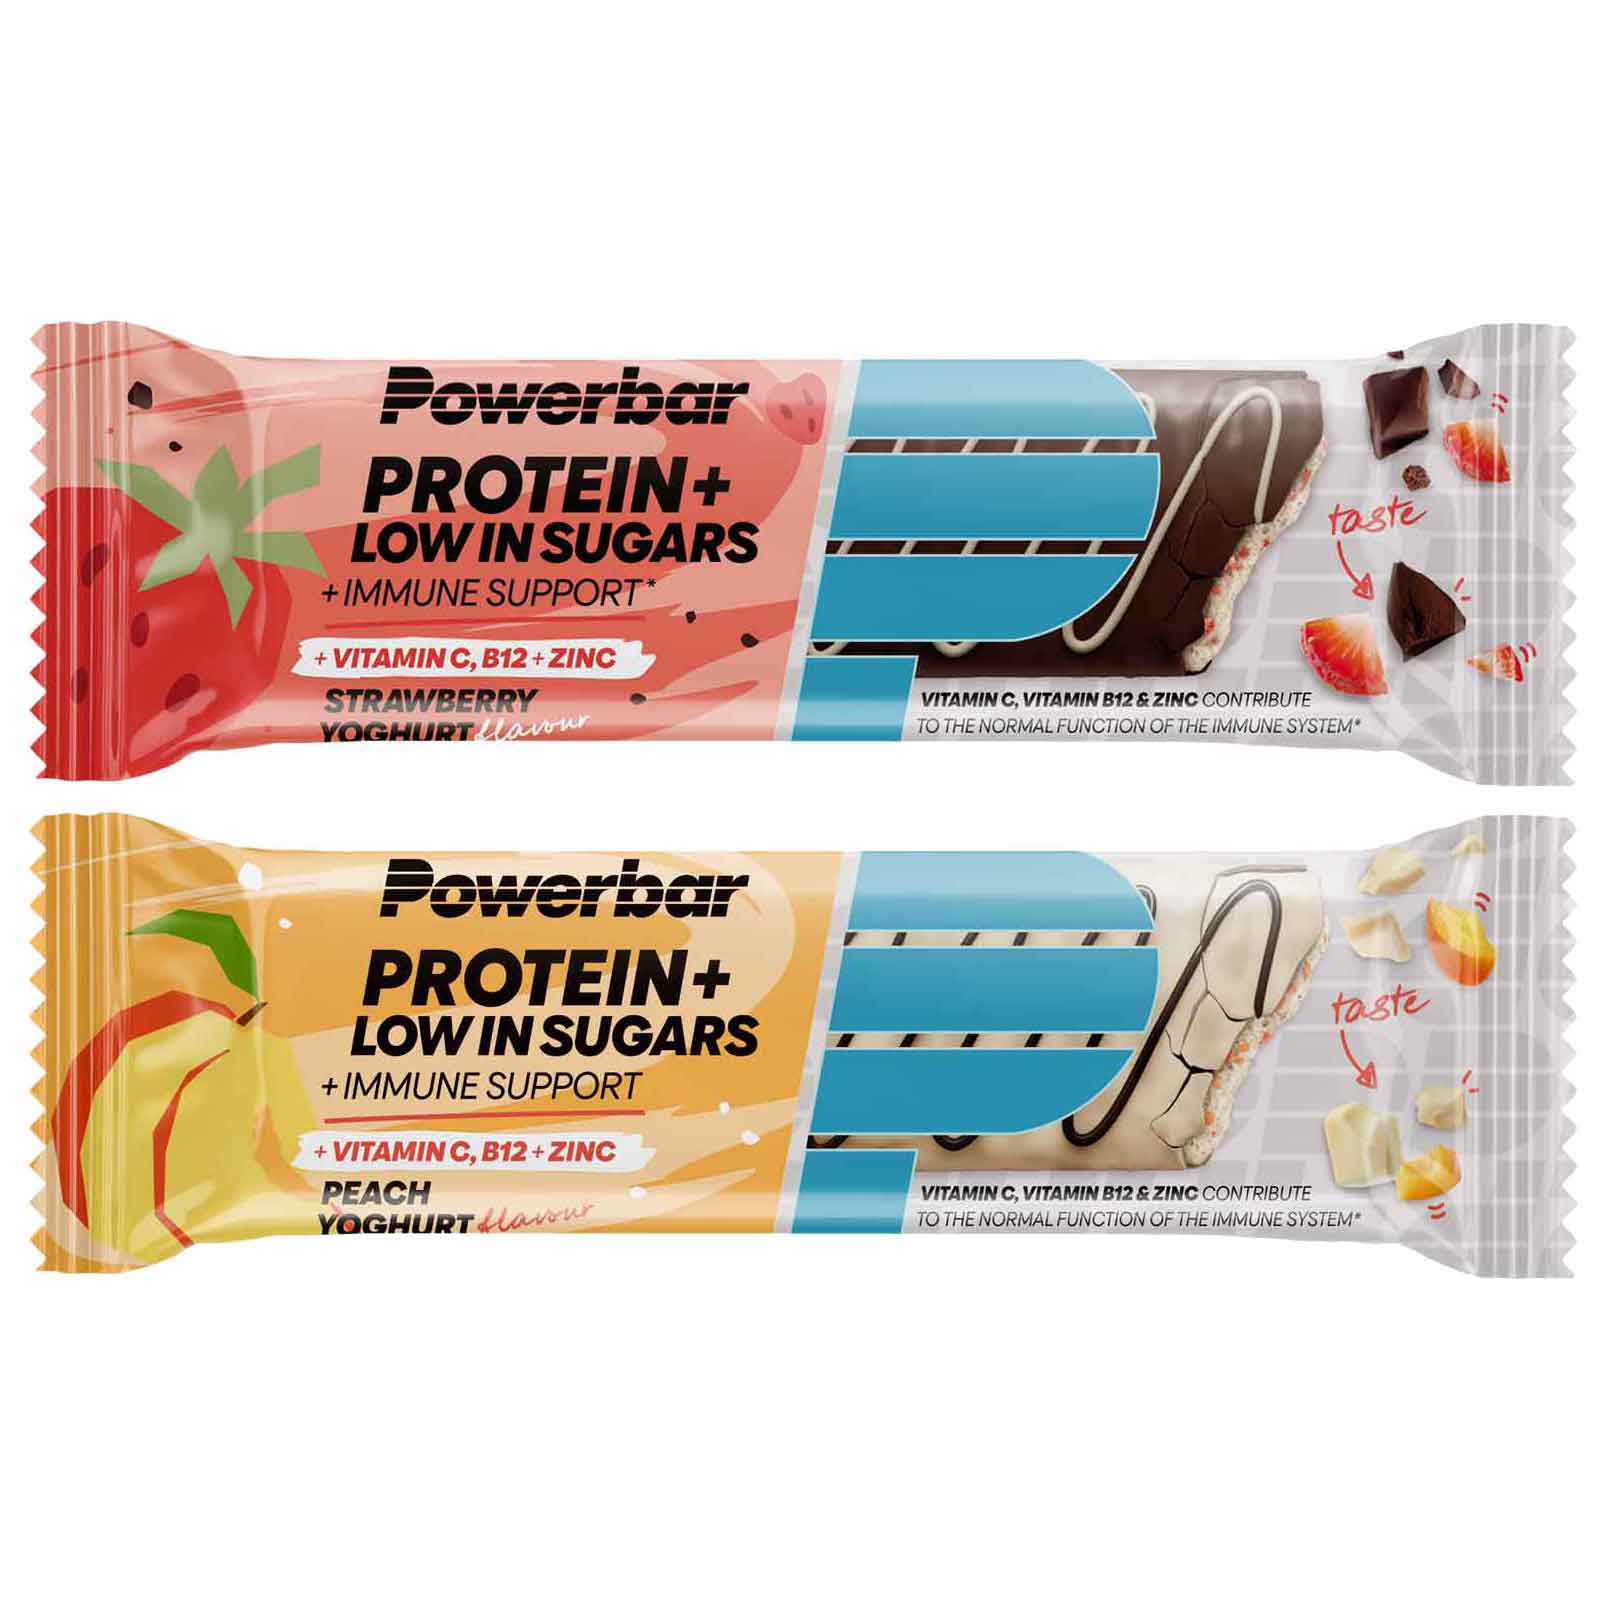 Picture of Powerbar Protein+ Low in Sugars Immune Support Bar - 4x35g